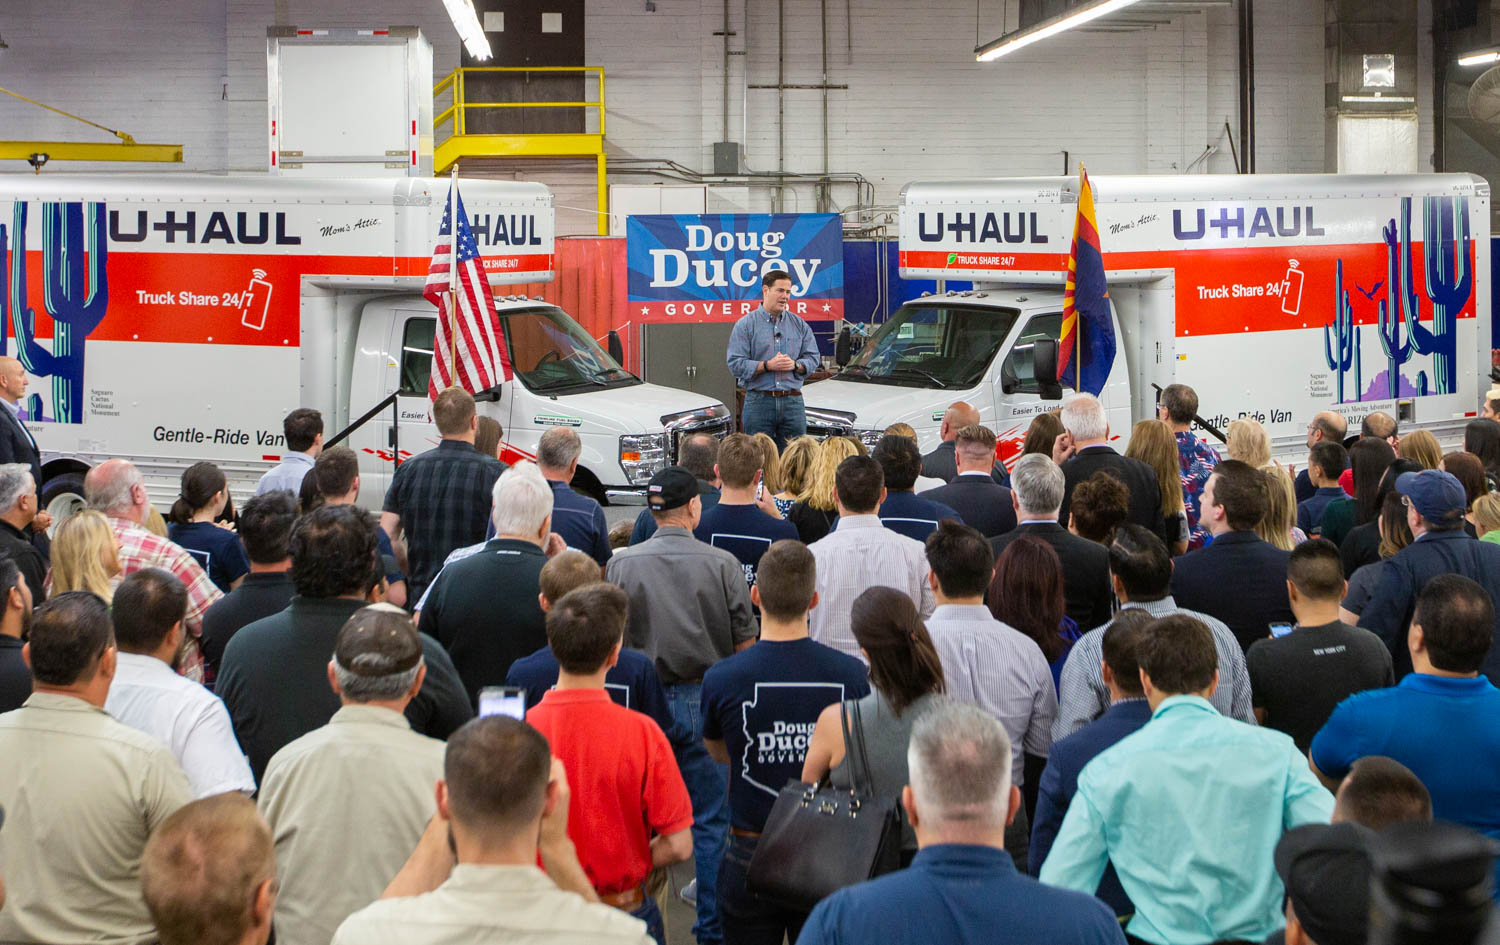 Arizona Governor Doug Ducey Selects U-Haul to Launch Re-Election Campaign